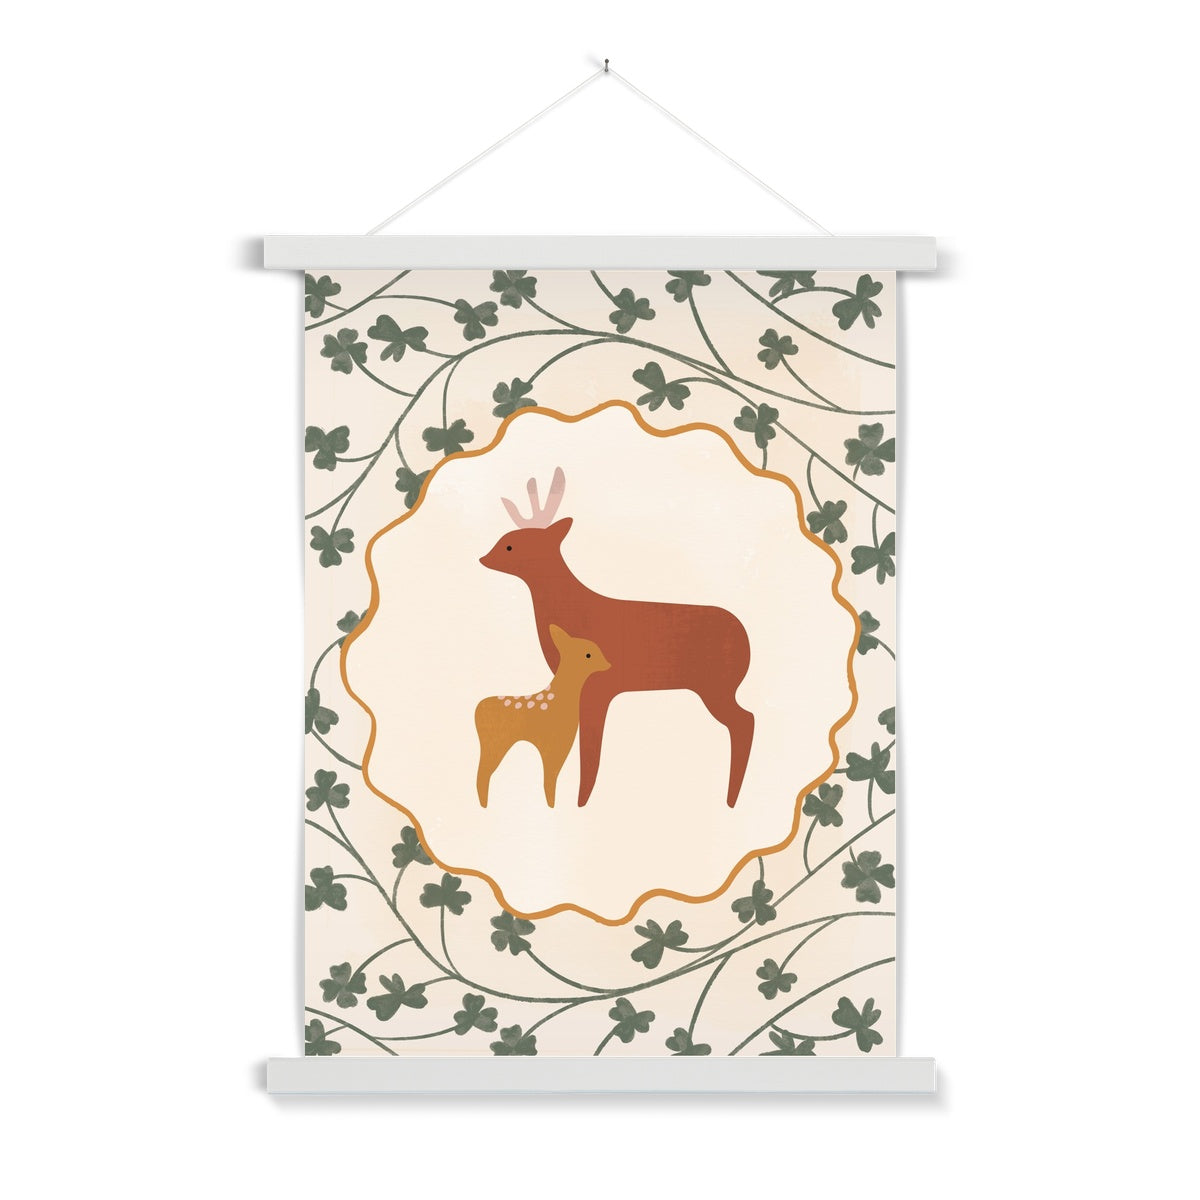 Deer With Fawn Fine Art Print with Hanger